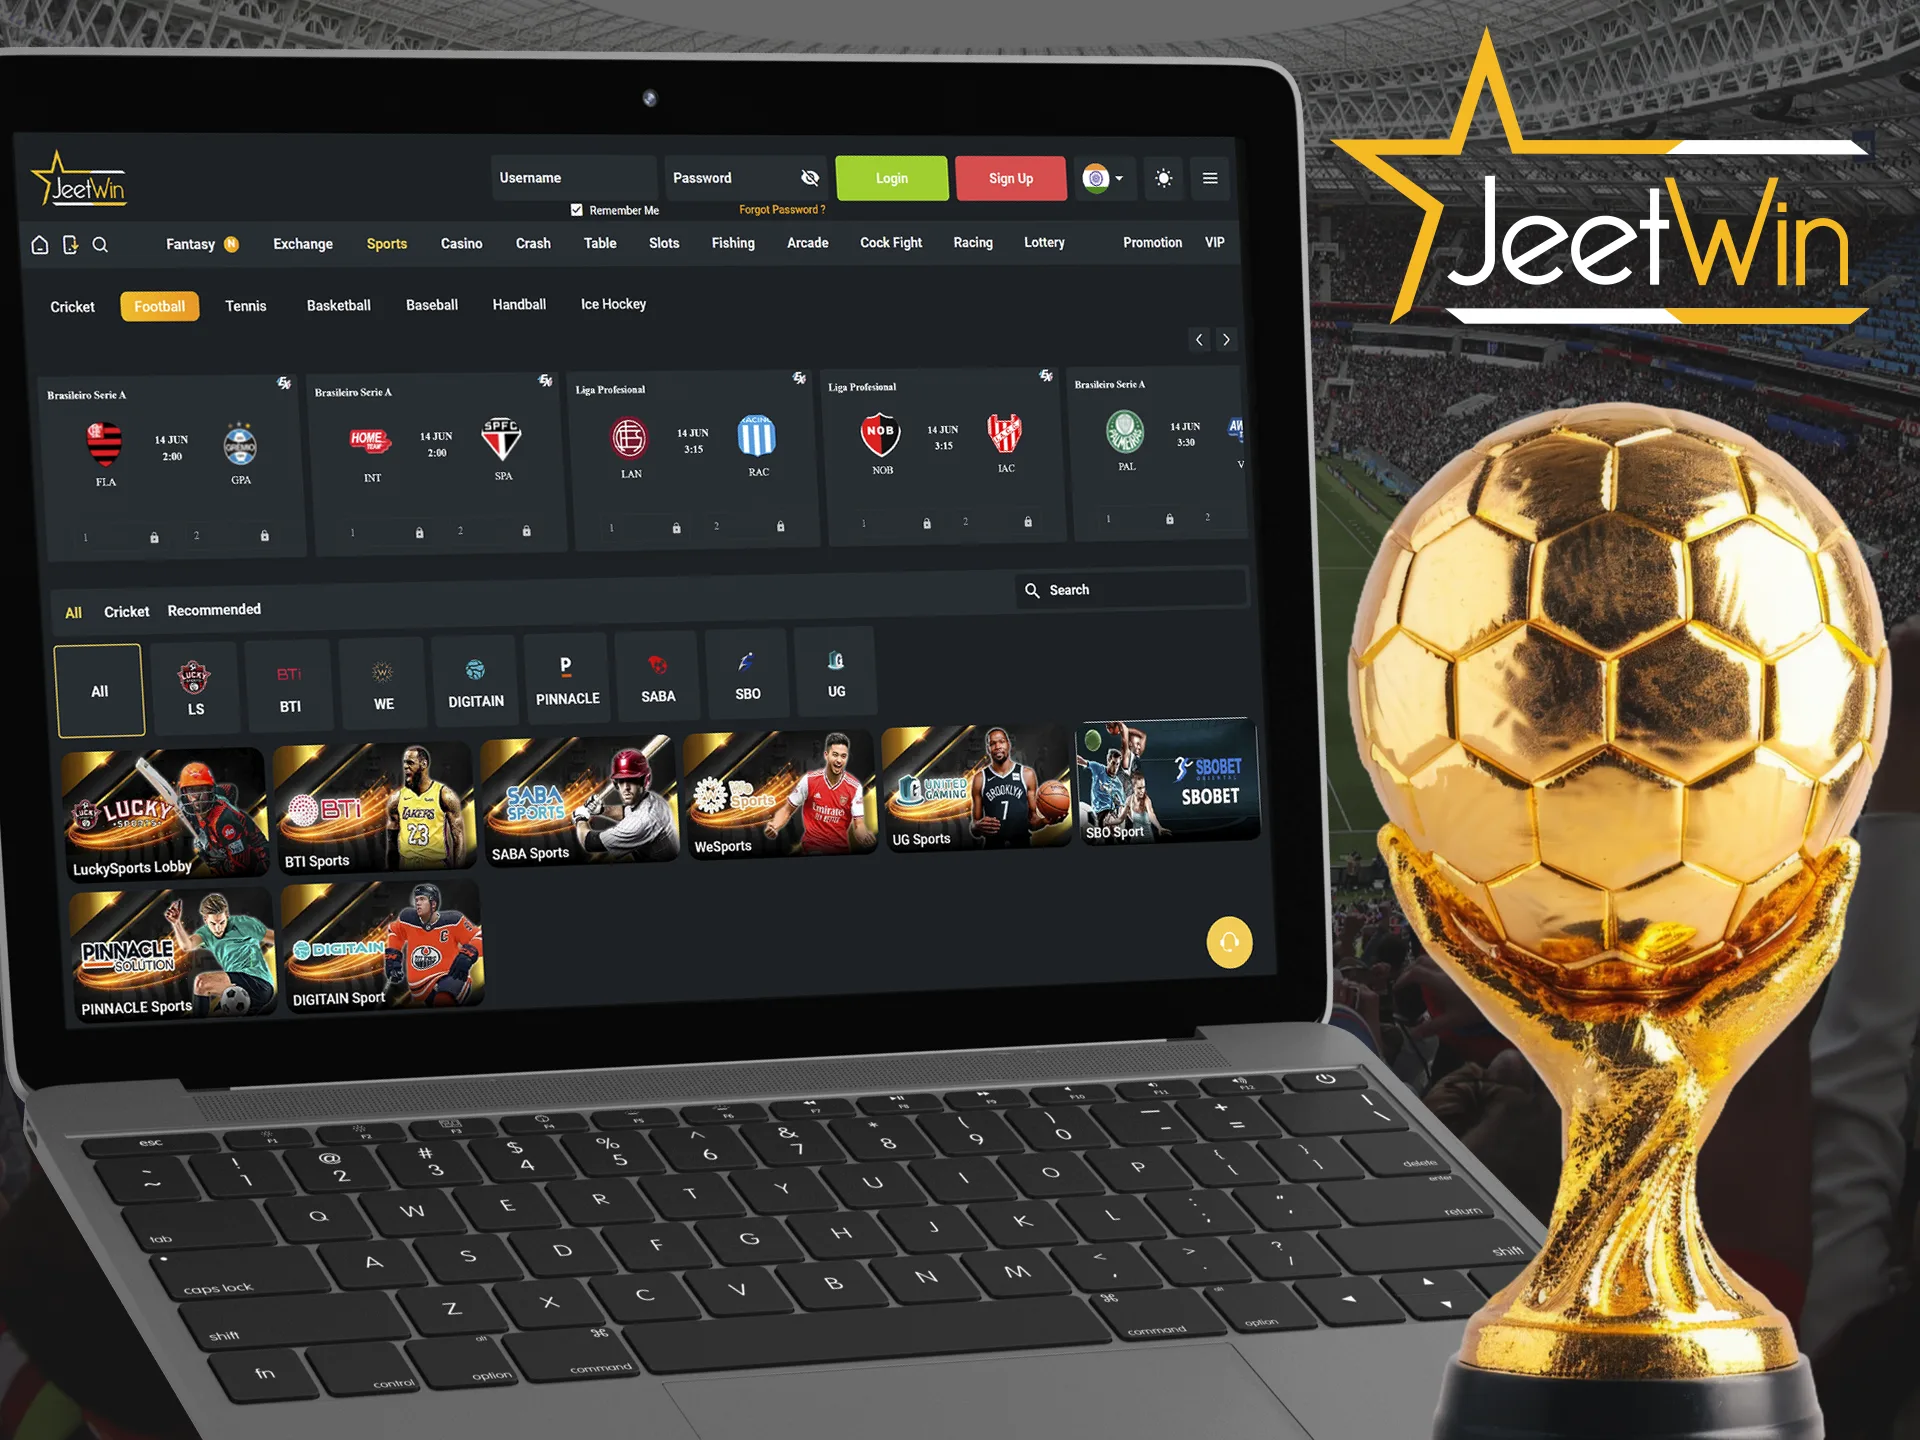 Find out which tournaments you can bet on at Jeetwin.